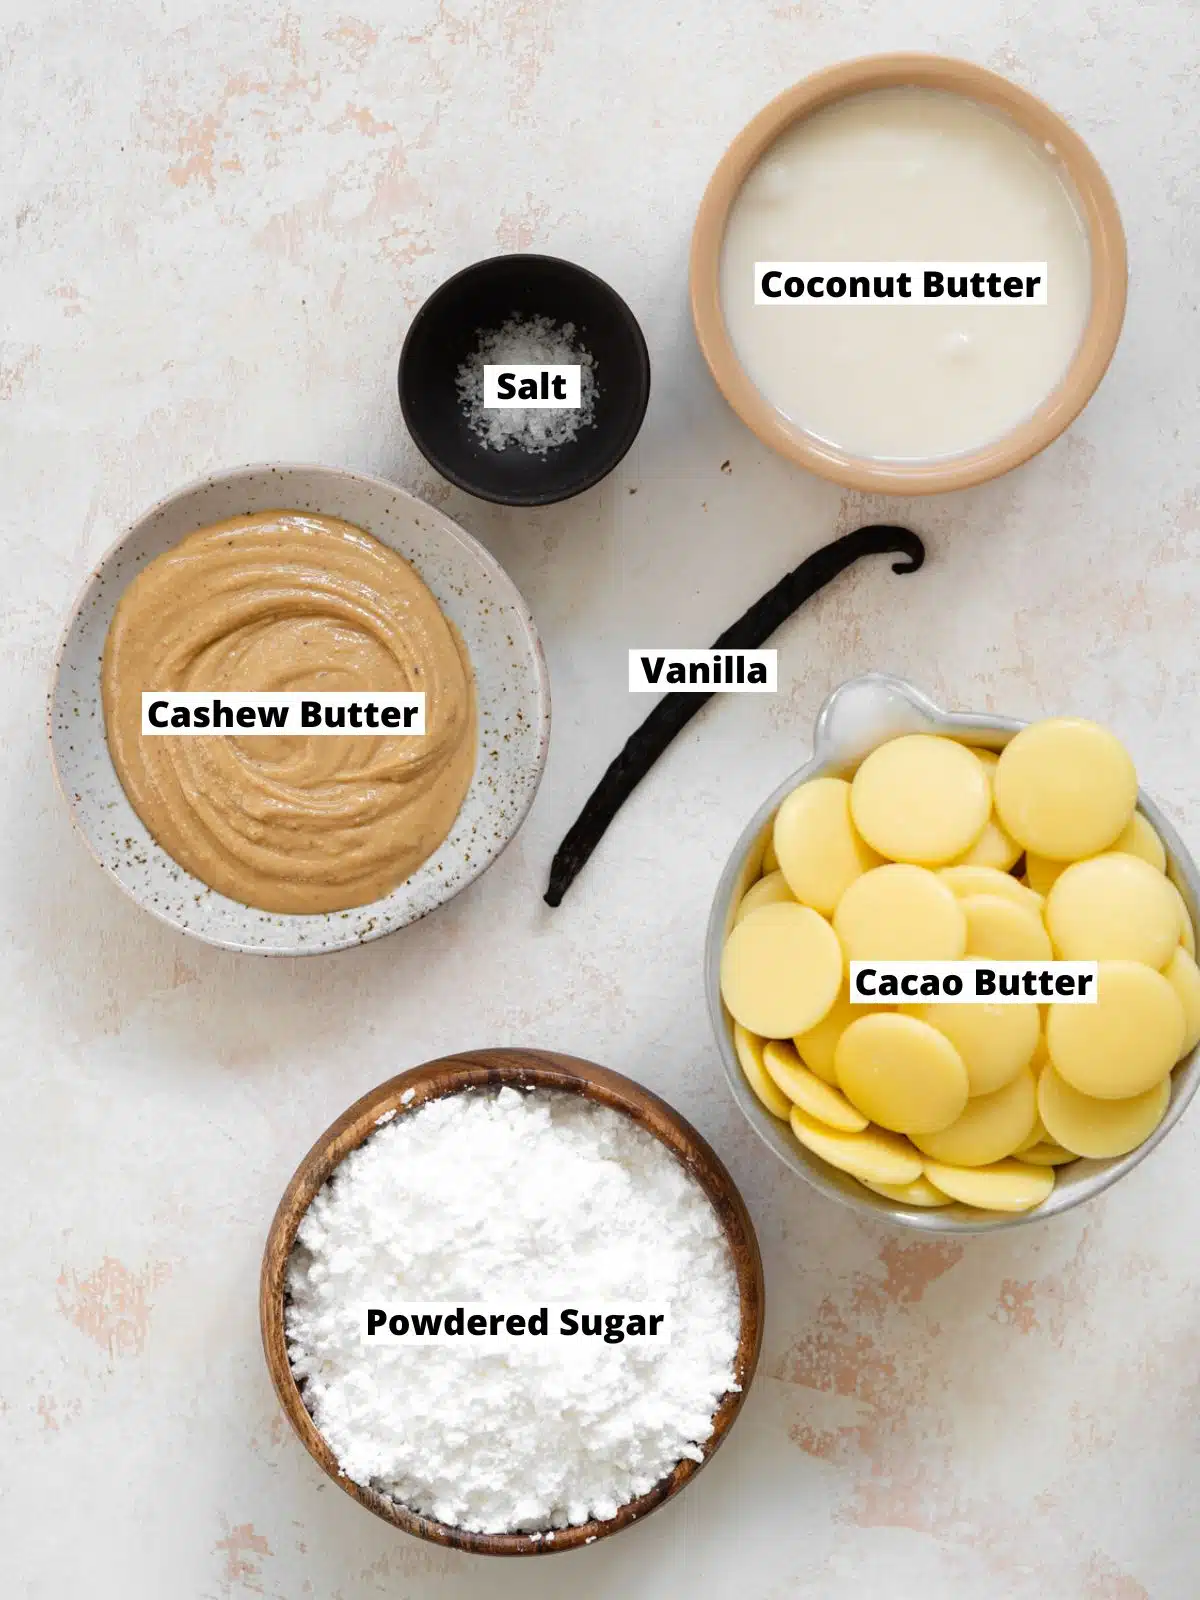 ingredients to make dairy free white chocolate bars measured out in bowls on a white surface.